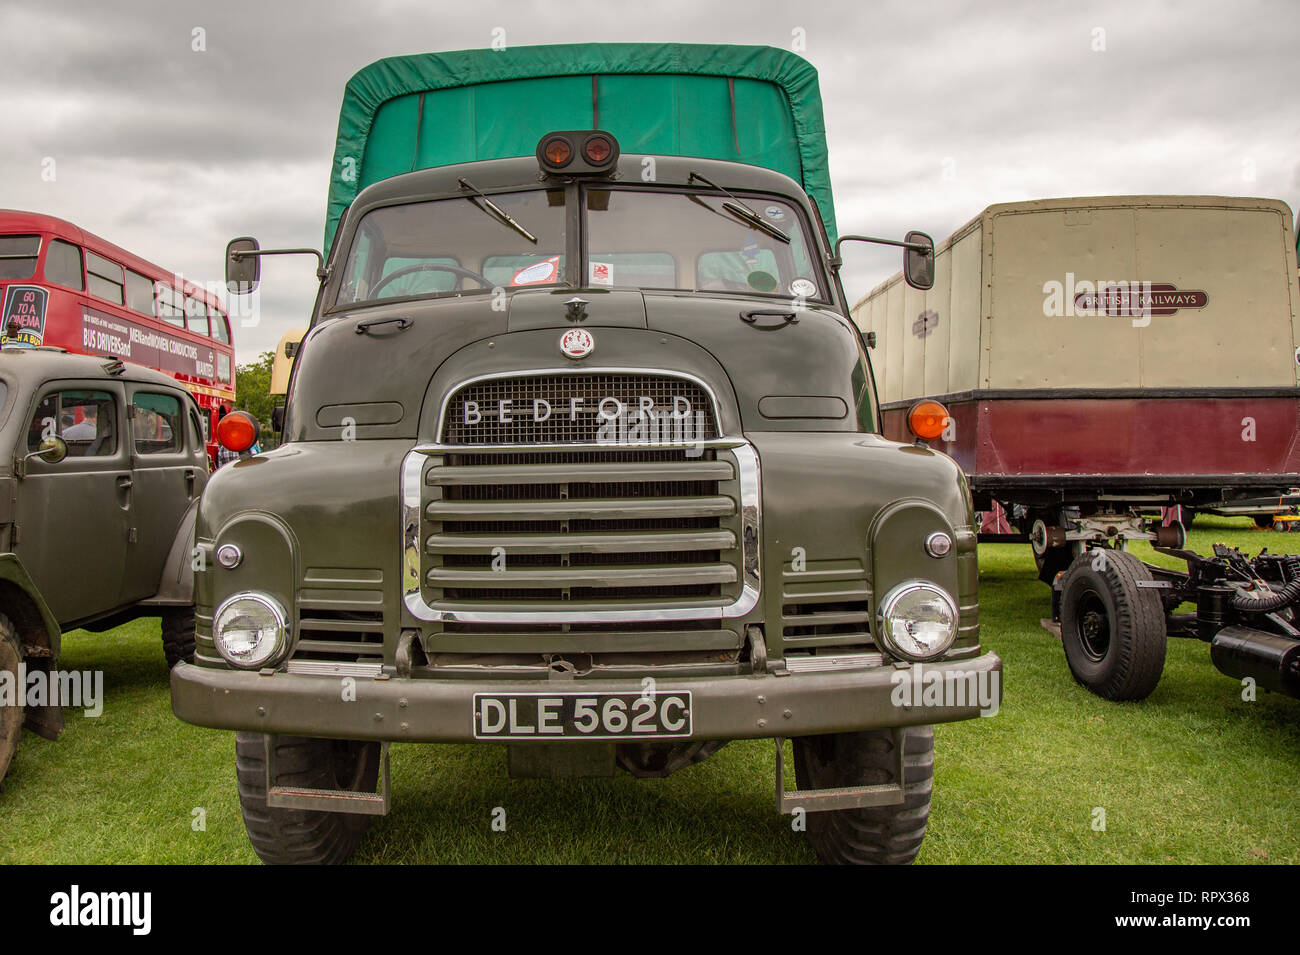 Enfield, Middlesex, England, UK - May 24, 2015: Front view of an old Green Bedford truck at a car show. Stock Photo